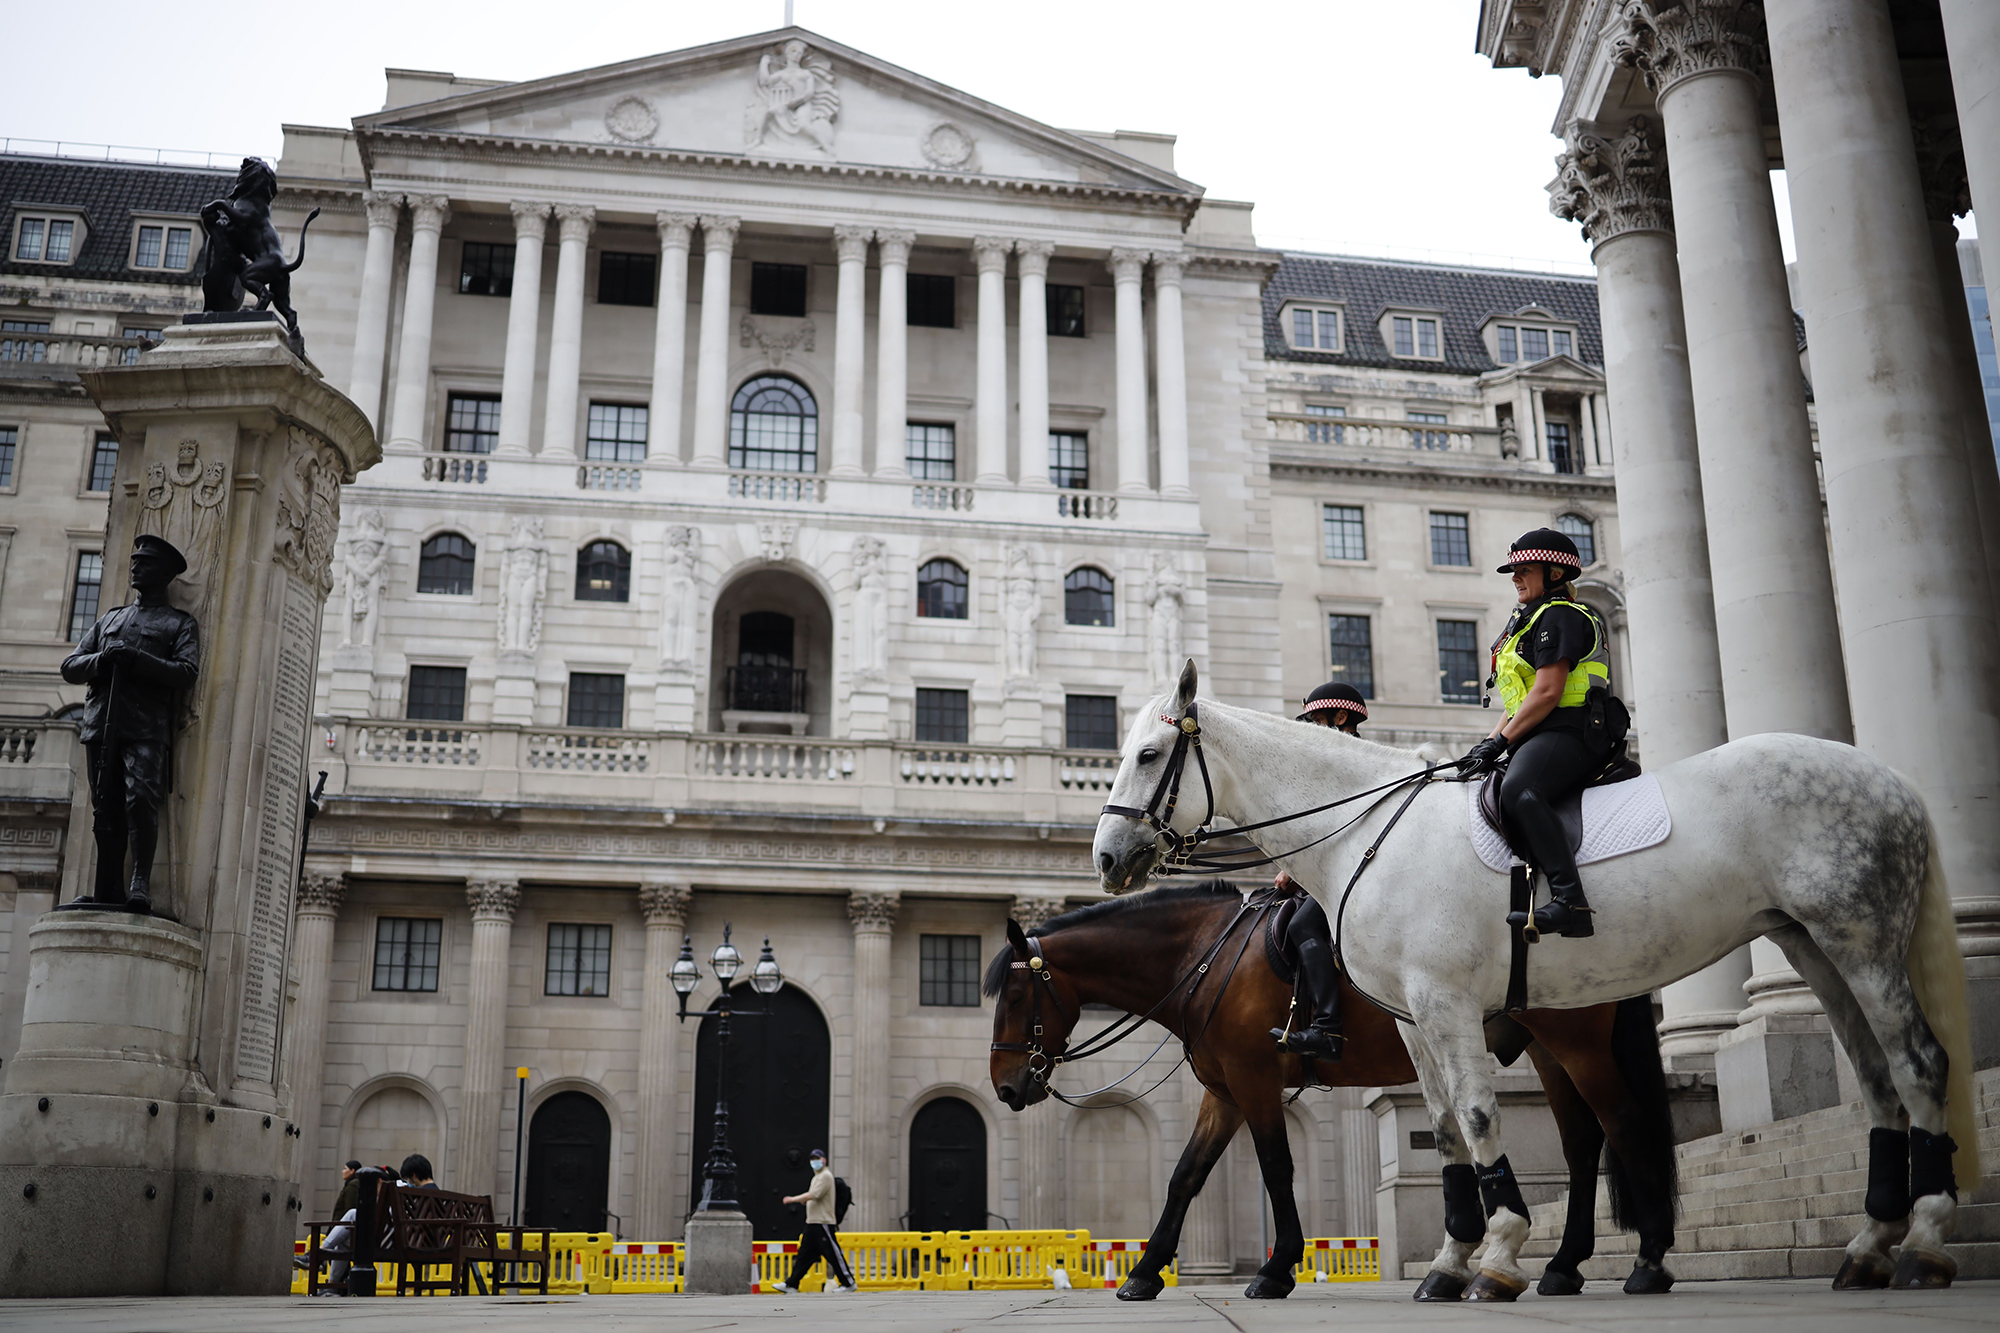 Mounted police officers sit in outside the Royal Exchange and the Bank of England in London on June 17, 2020.